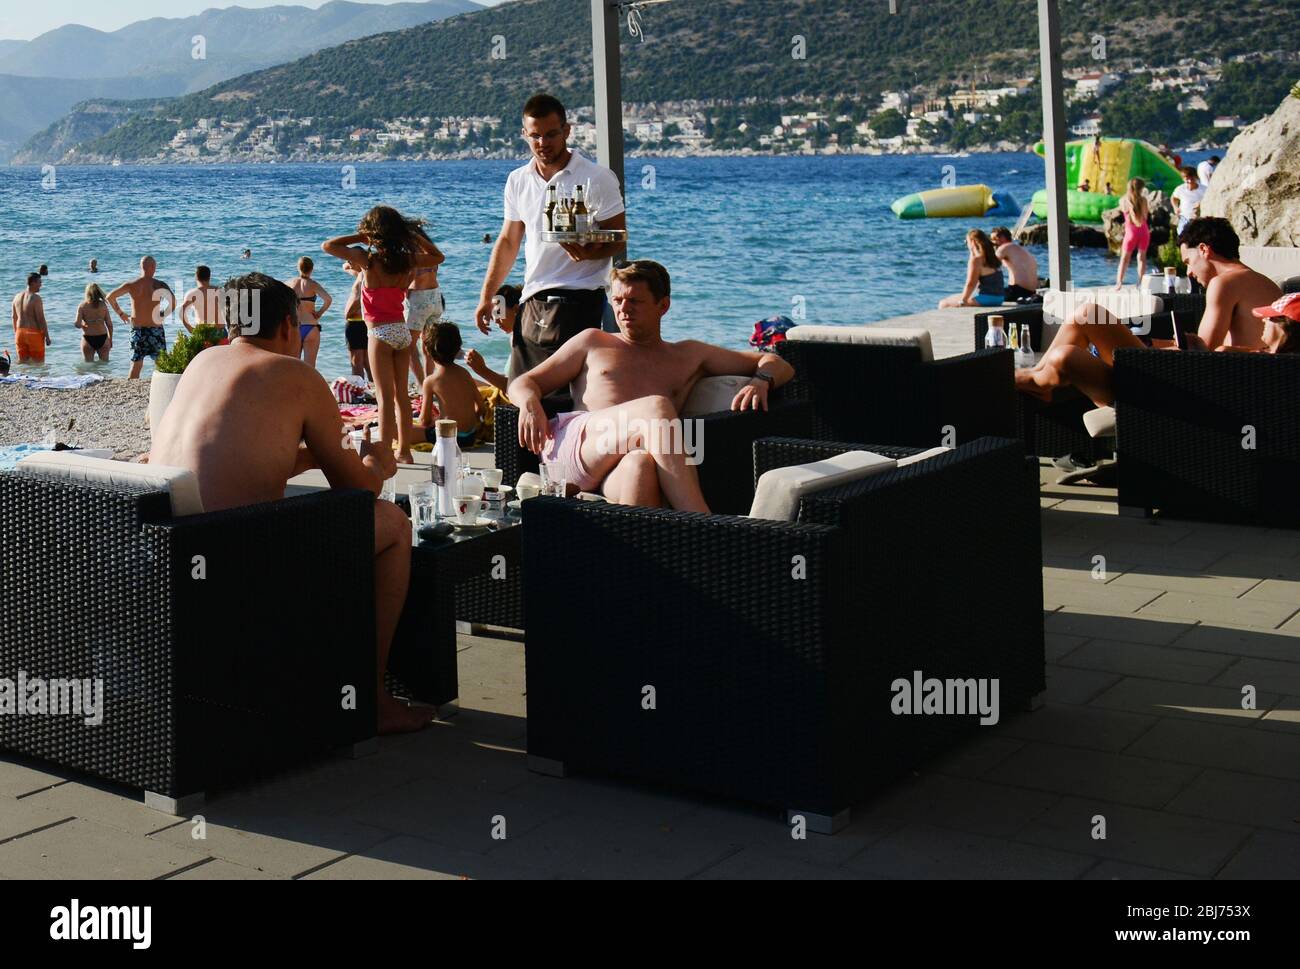 Chilling out on the beach in Dubrovnik, Croatia. Stock Photo